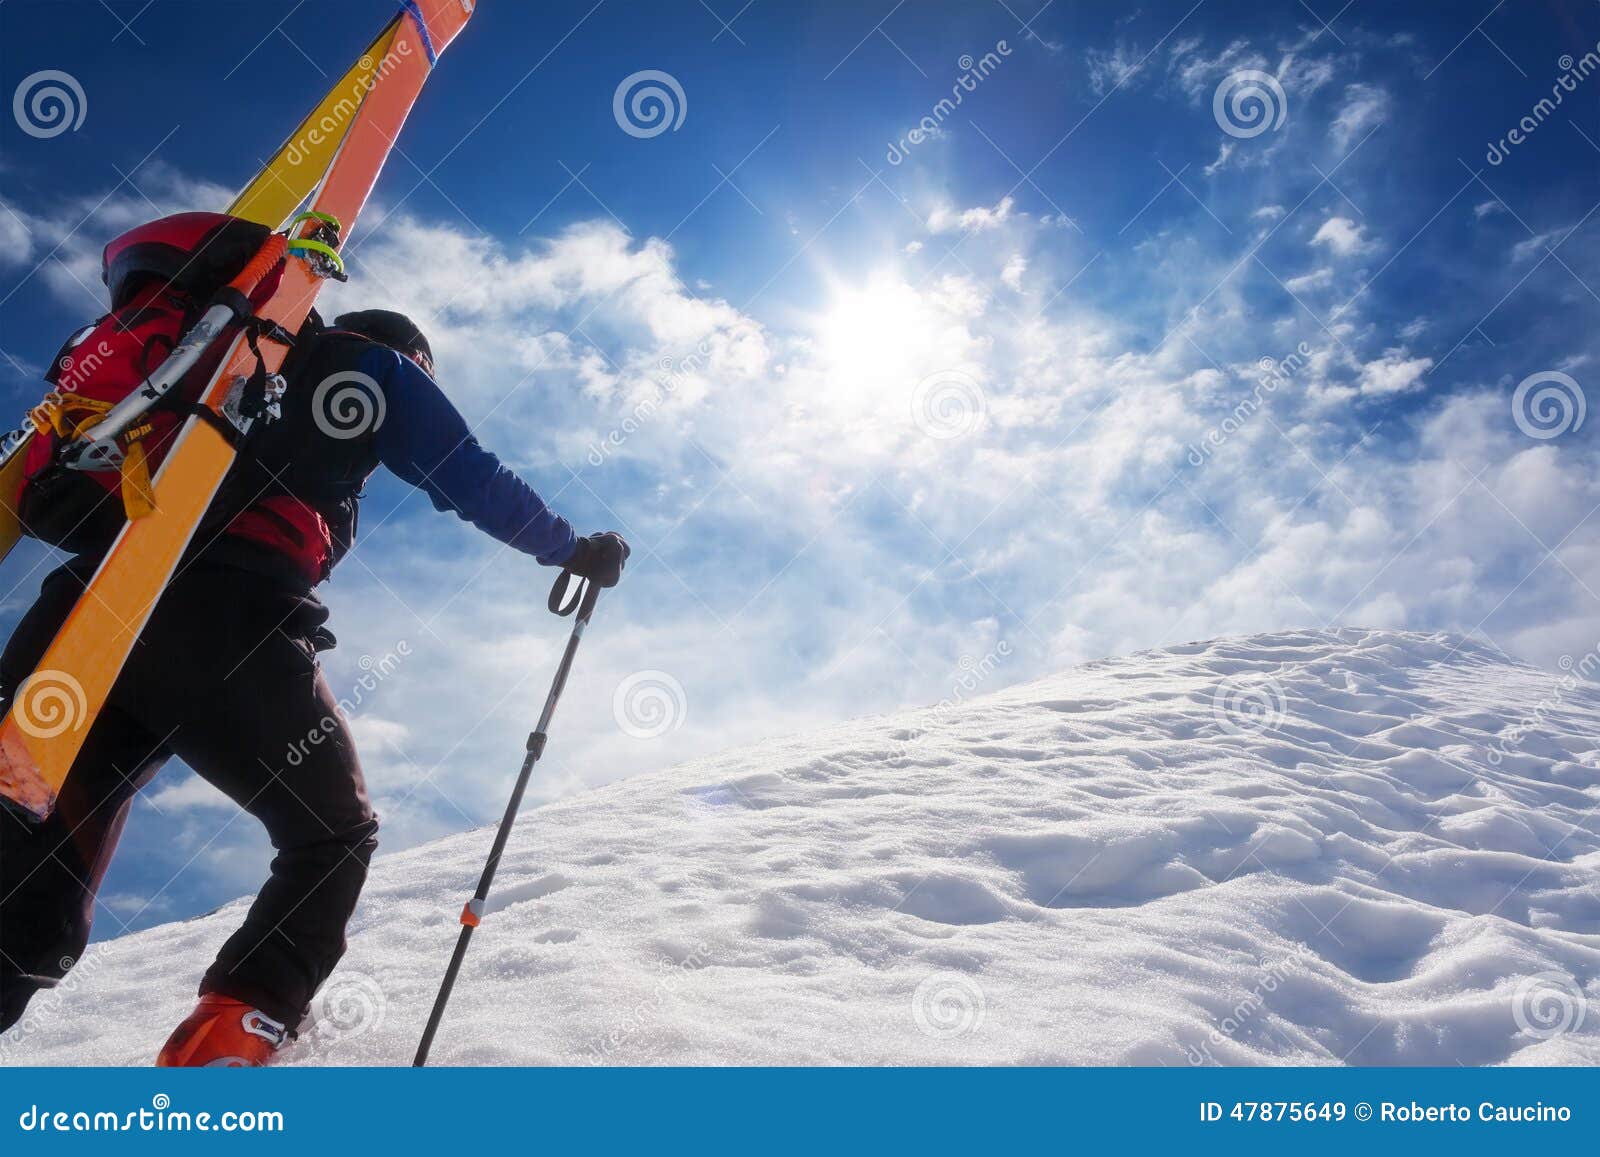 ski mountaineer walking up along a steep snowy ridge with the s